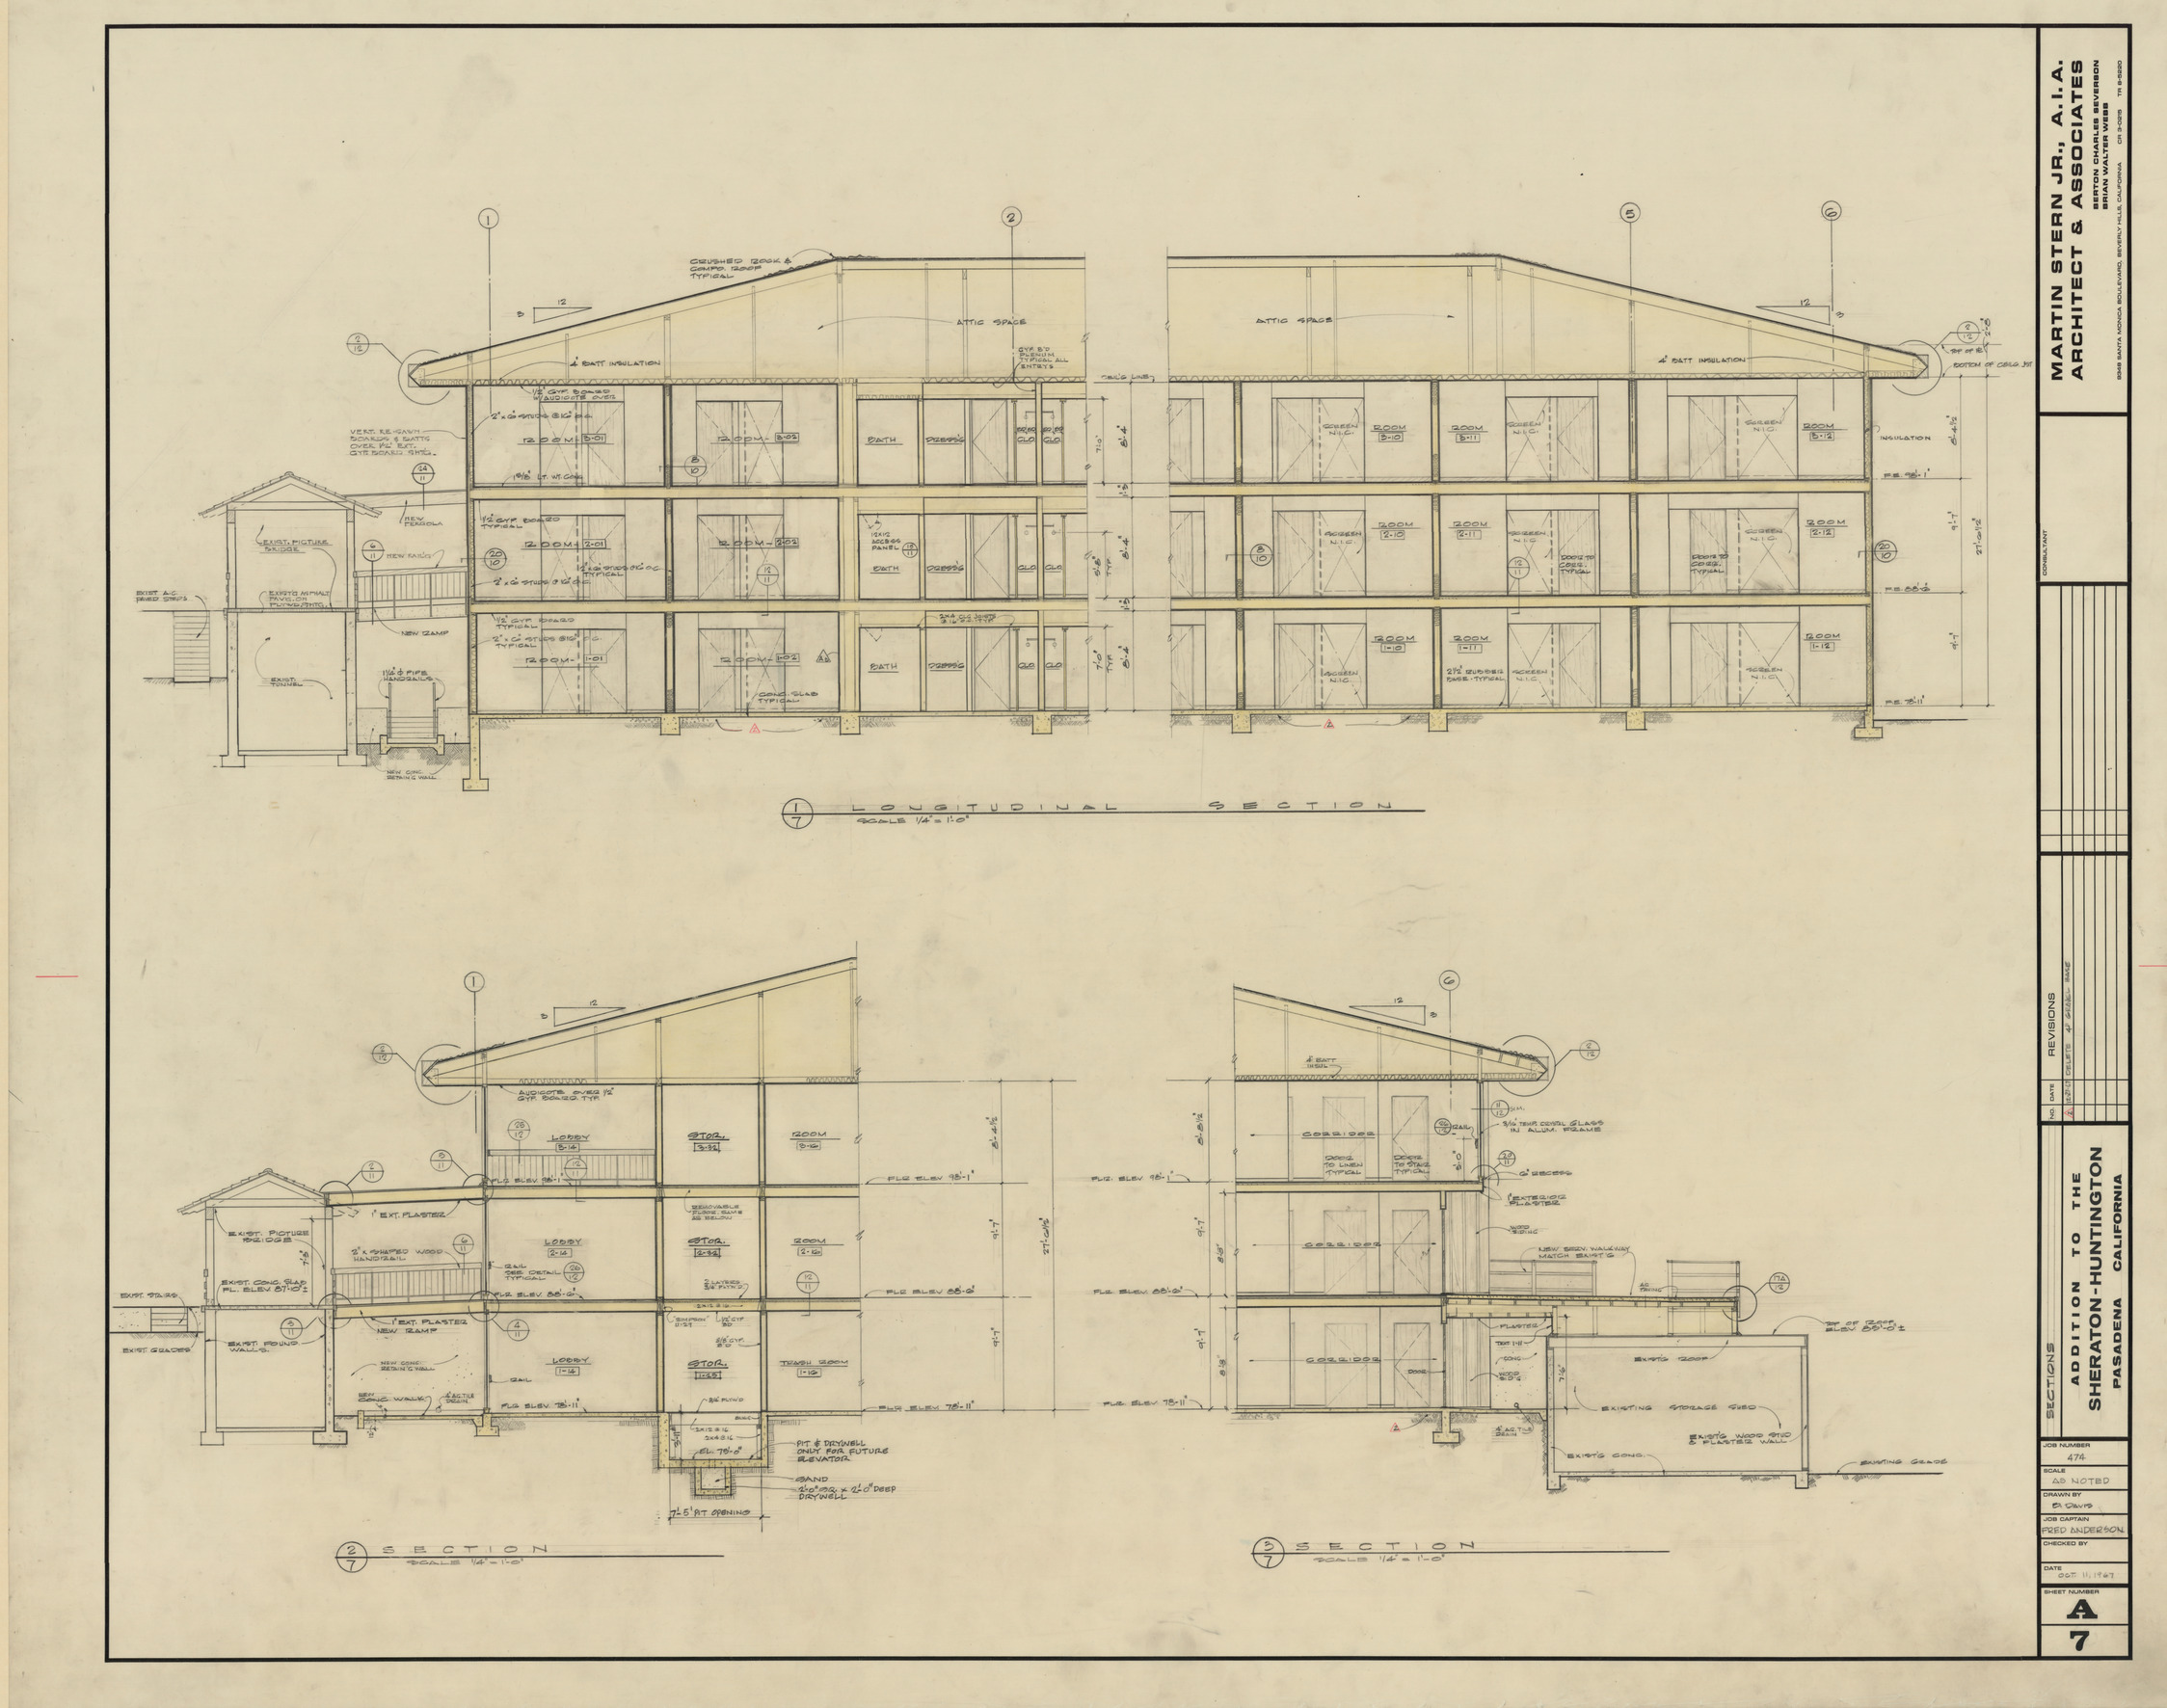 Huntington addition, architectural, electrical, mechanical, and plumbing: architectural drawings, image 007